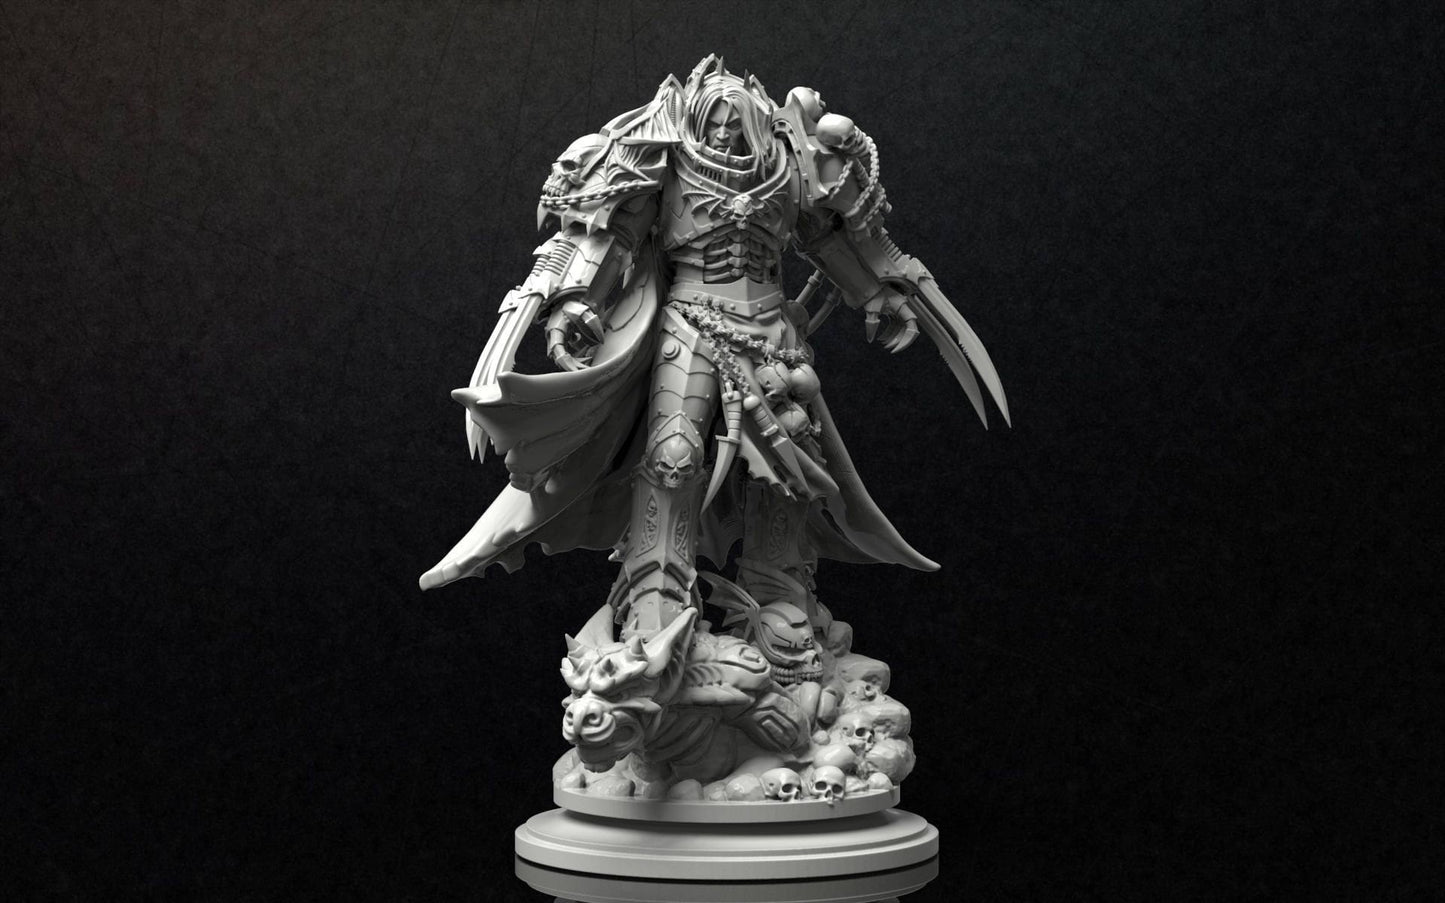 The Flesh Lord - 50mm scale - Multi-piece Kit - Advanced